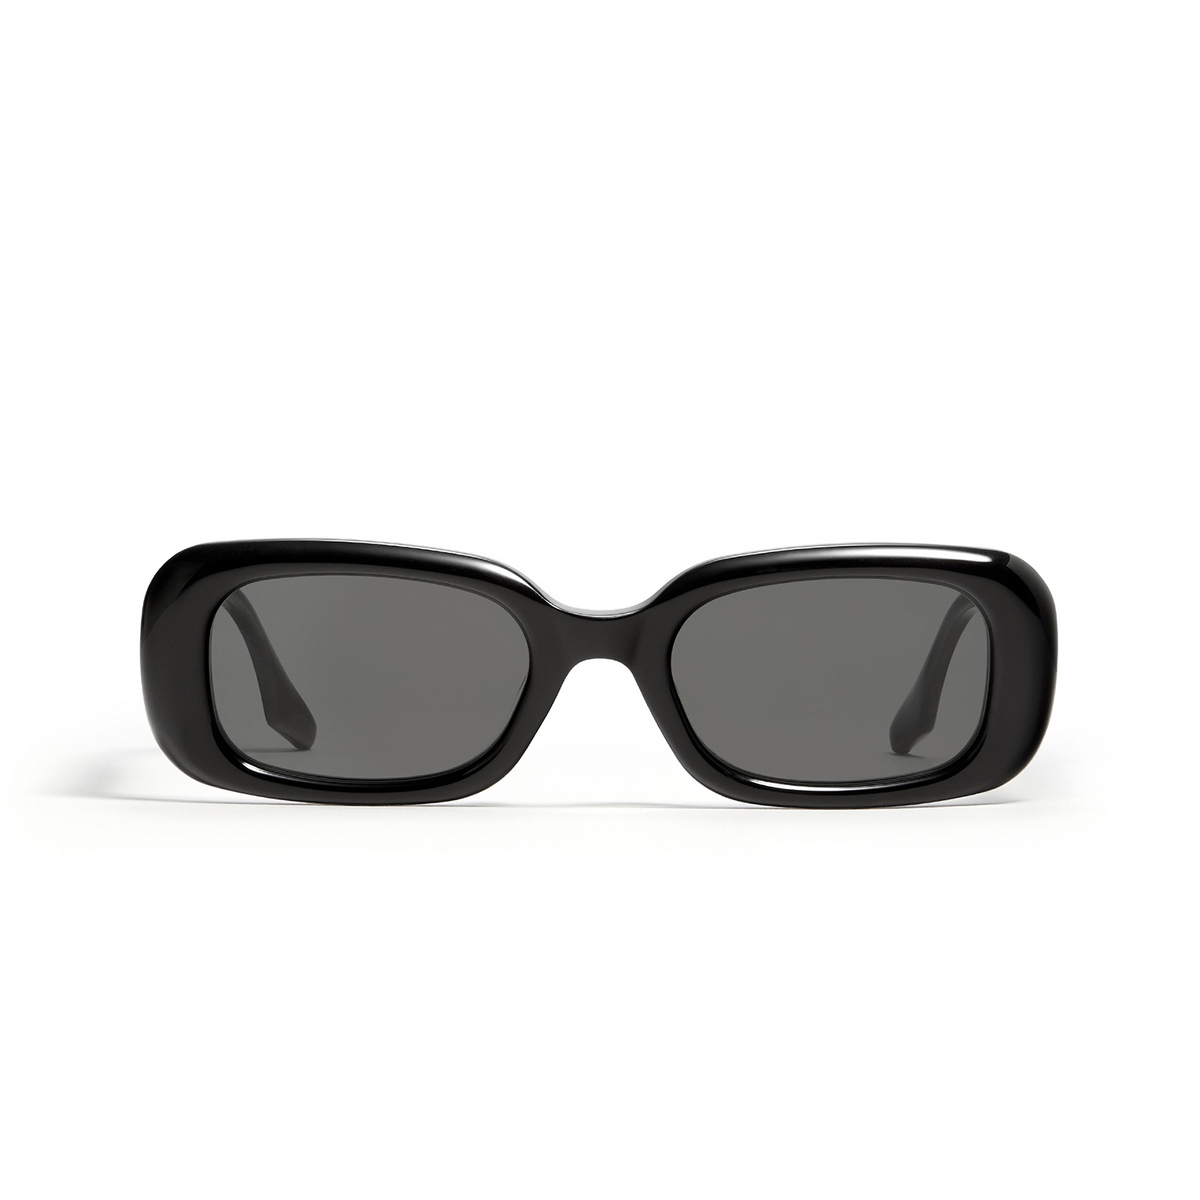 Gentle Monster BLISS Sunglasses 01 Black - front view